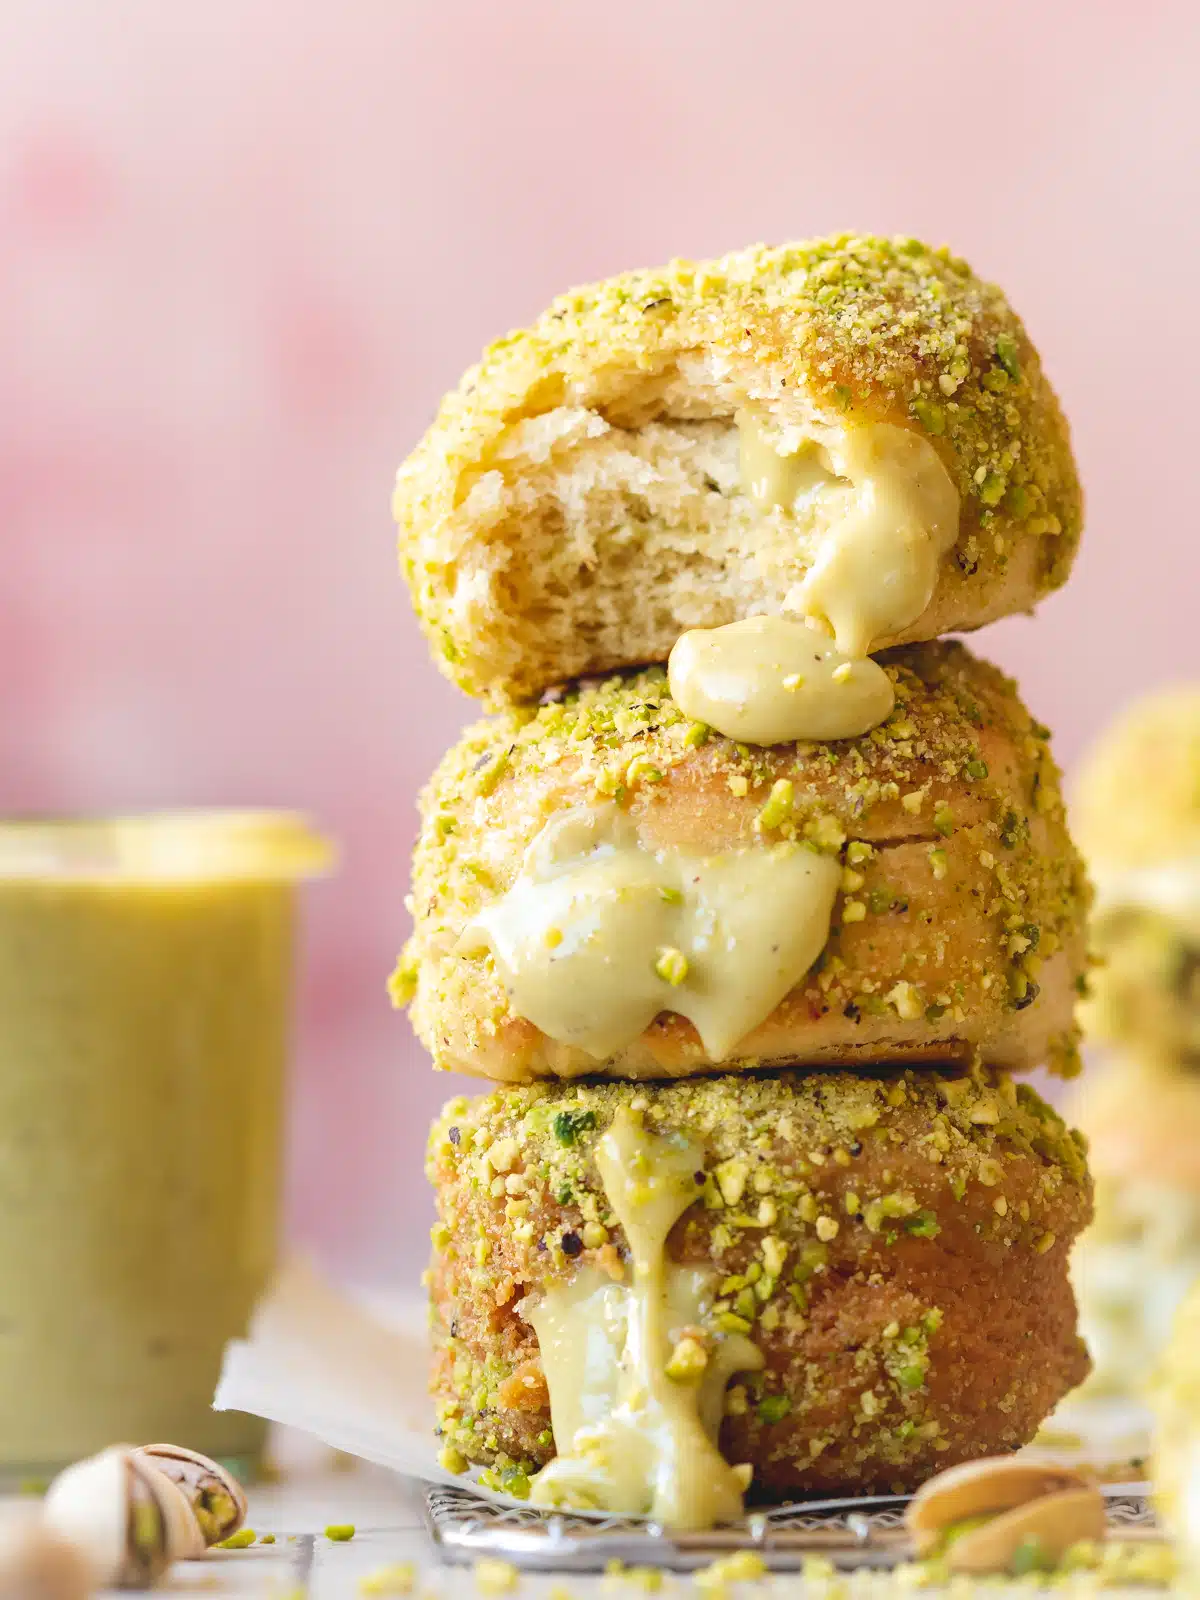 a stack of vegan yeast donuts coated in sugar and pistachios with pistachio cream oozing out from their centers. The background is pink which contrasts with the small green jar of pistachio pastry cream next to the doughnut pile.